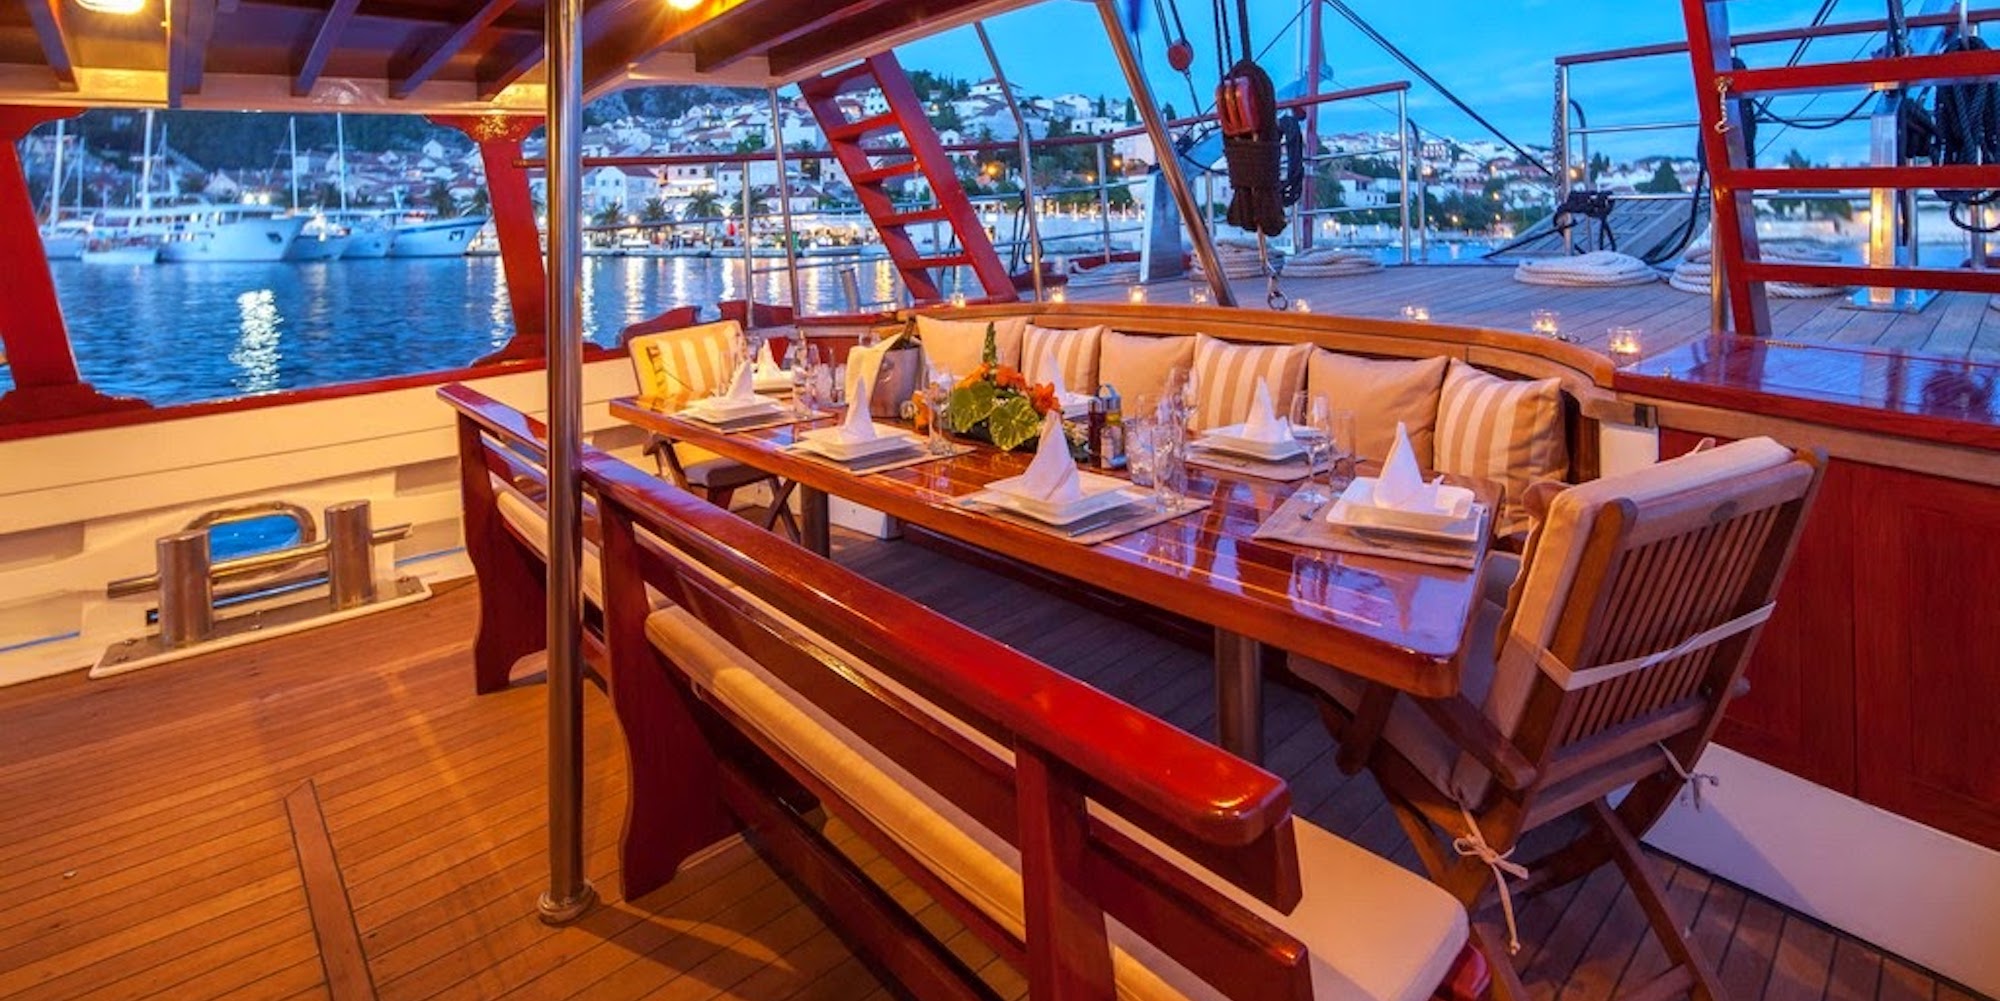 The outdoor dining room aboard the Romanca ship harbored for the evening